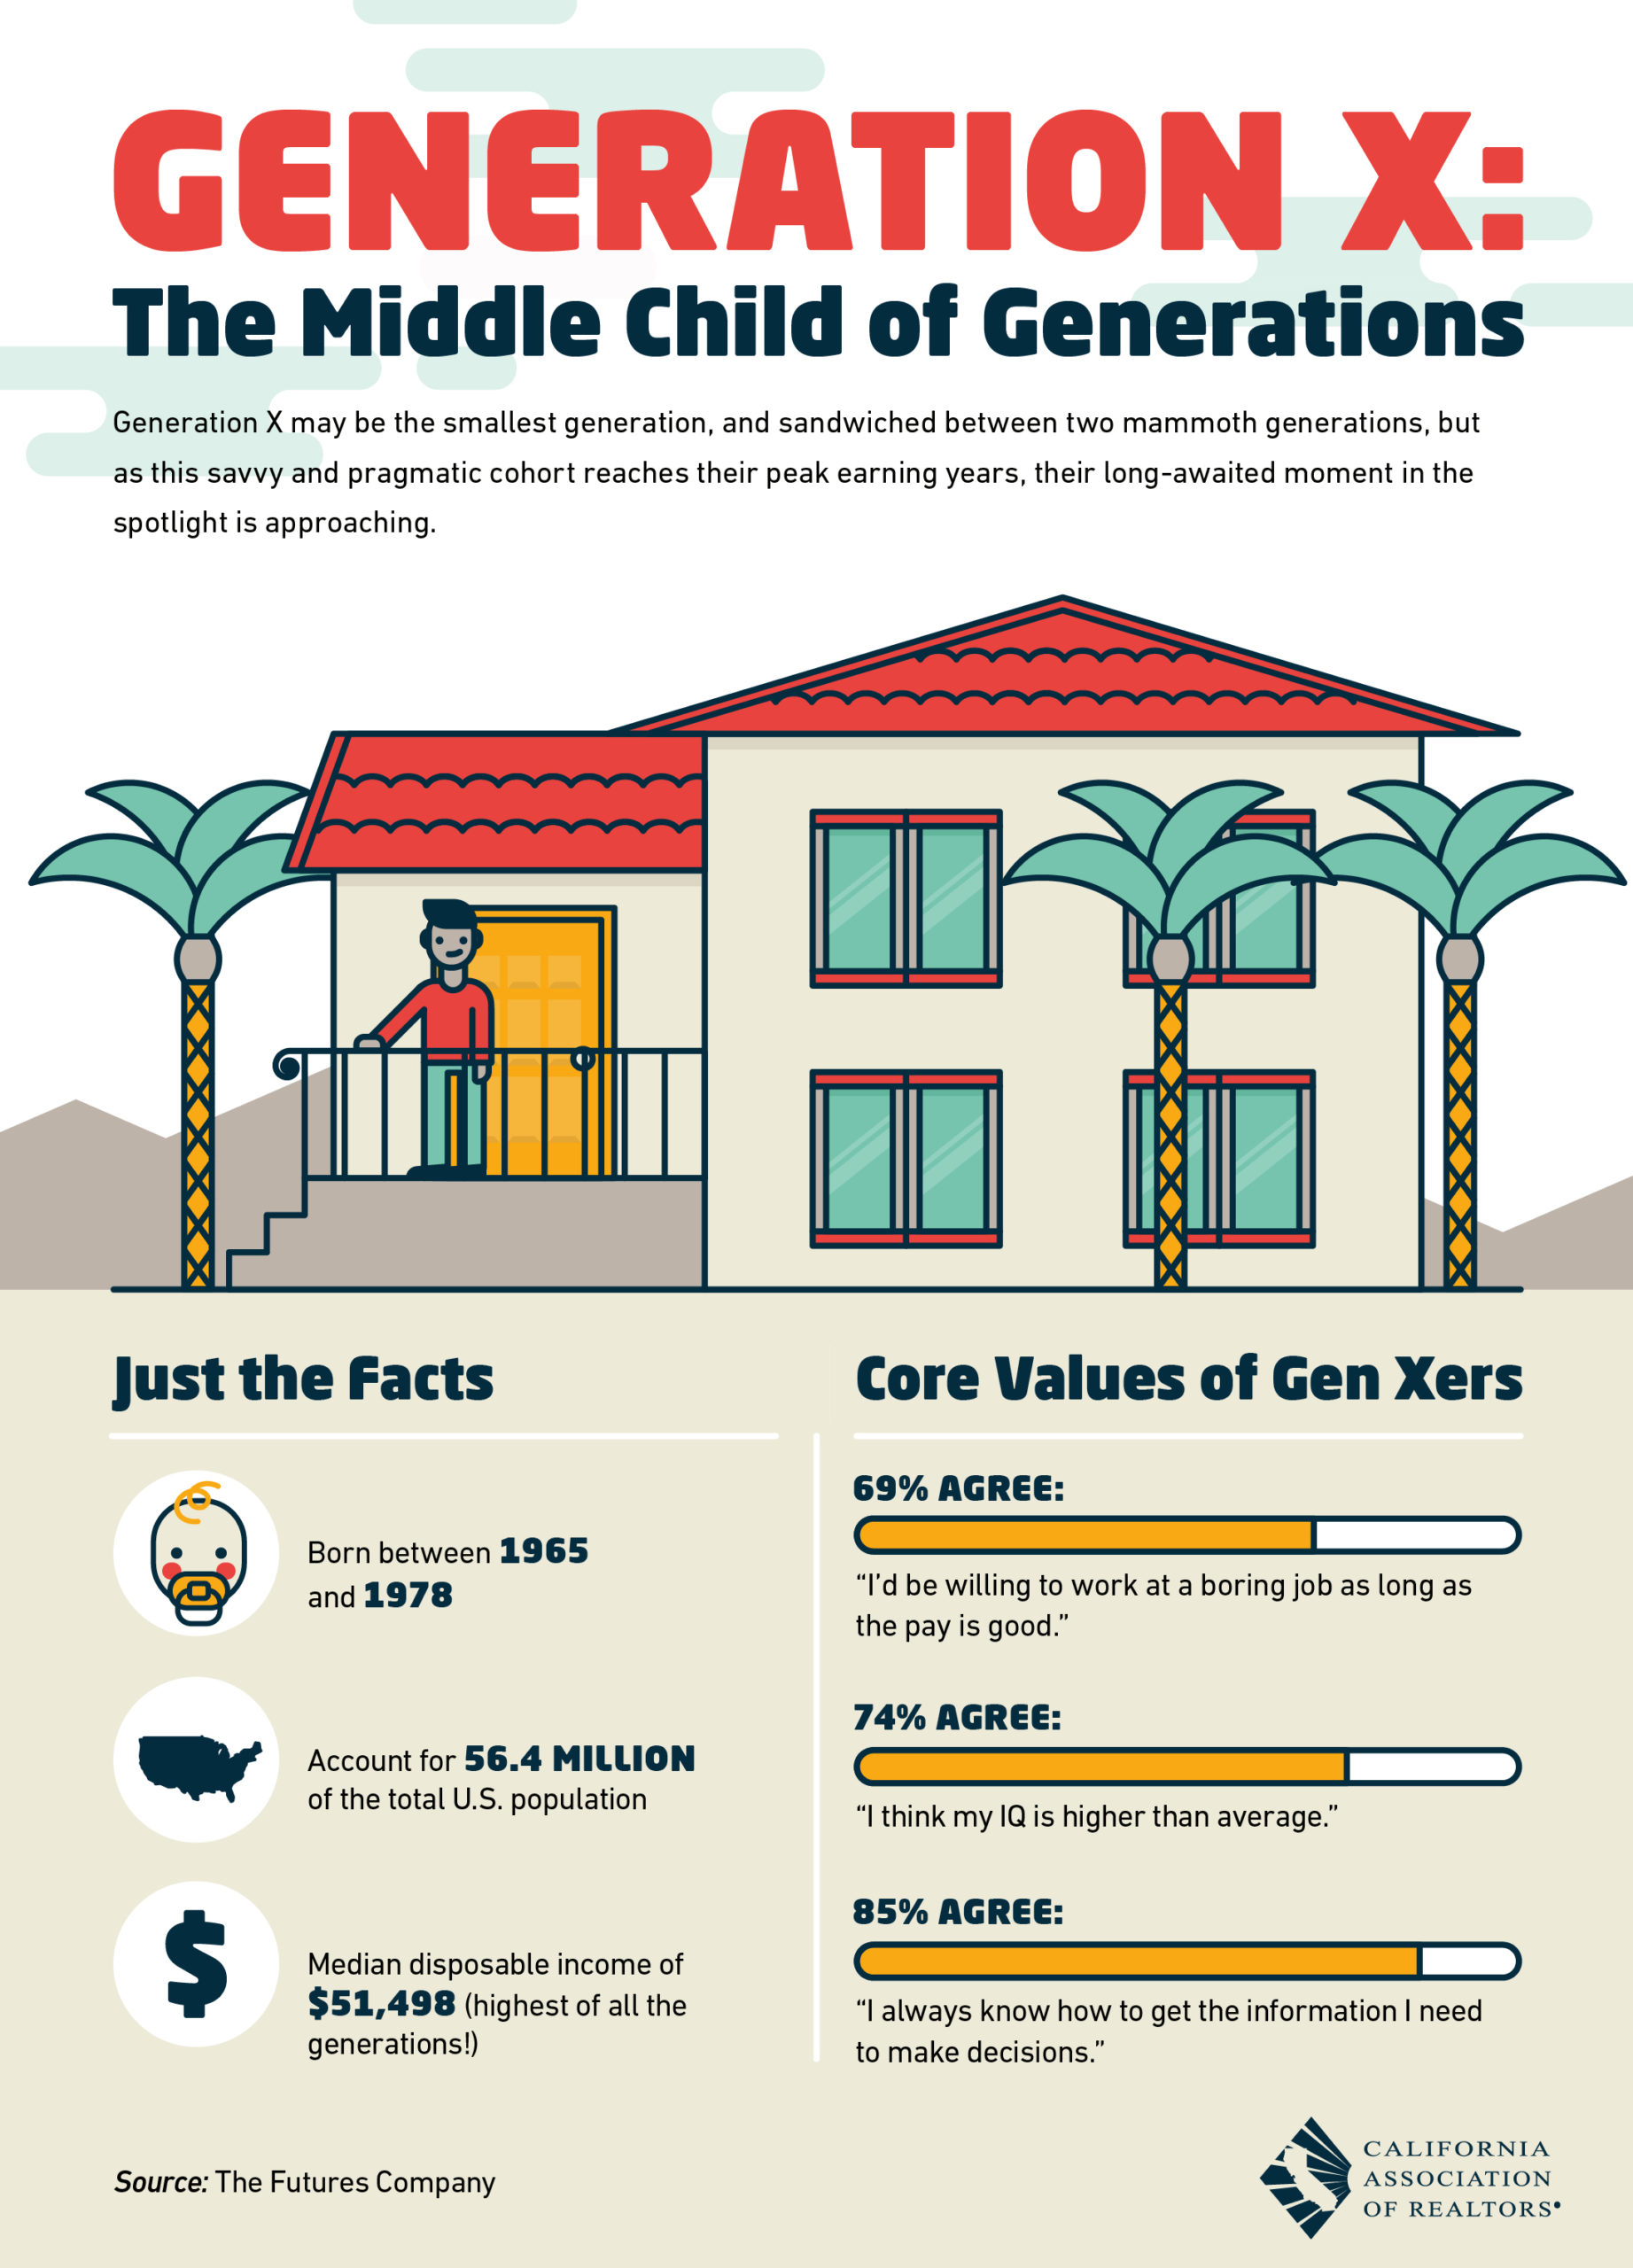 Infographic: Gen X is Savvy, Pragmatic With A High IQ